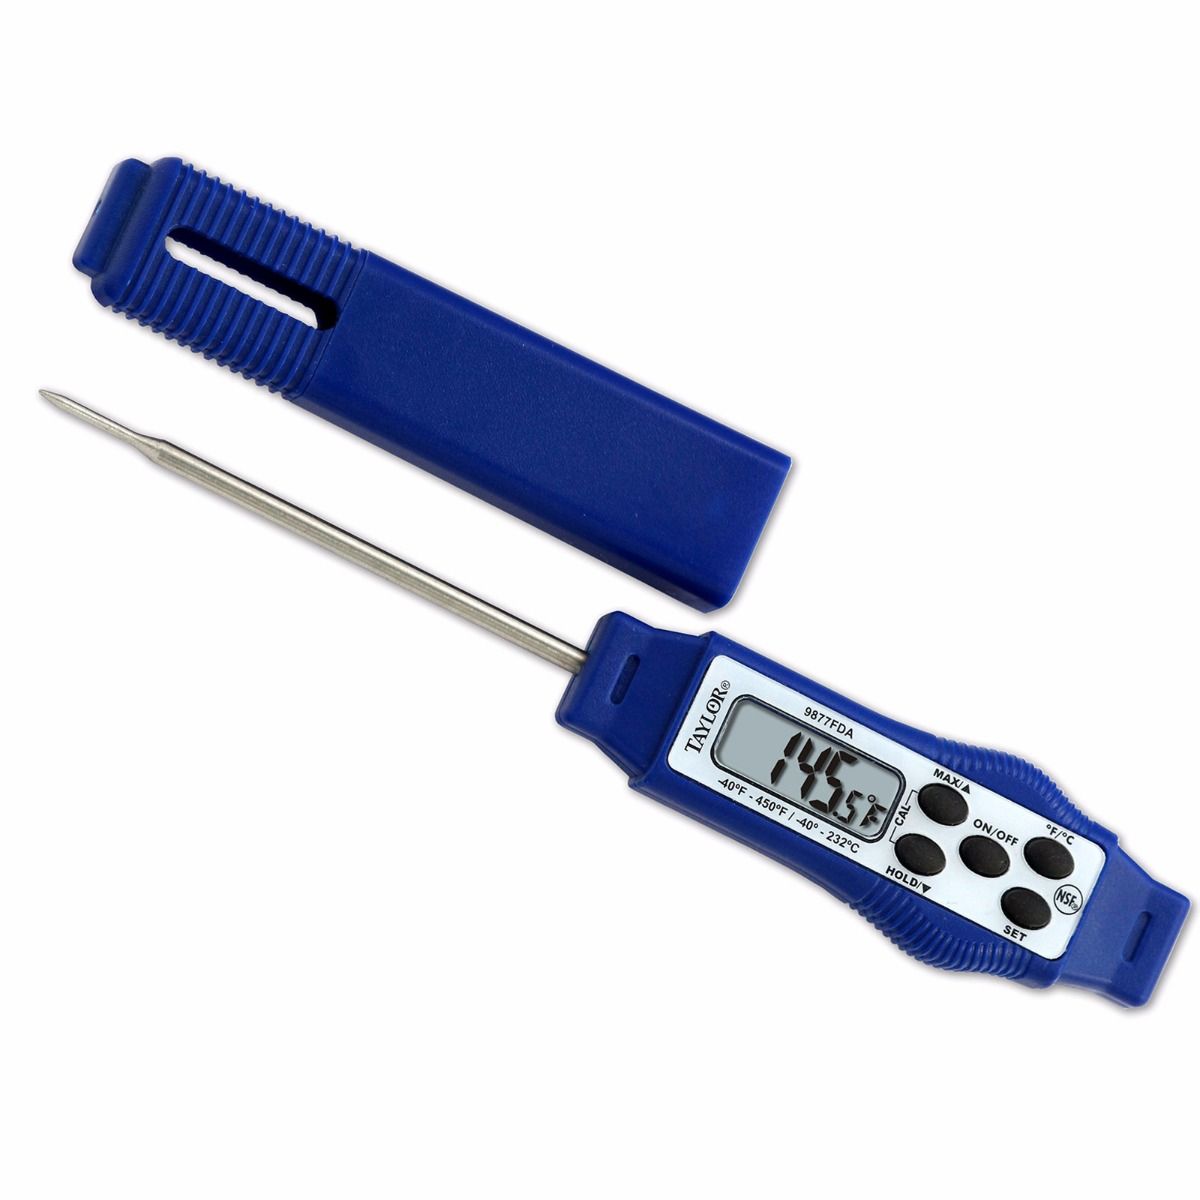 Taylor Fiver Star Thermometer, Digital, Compact